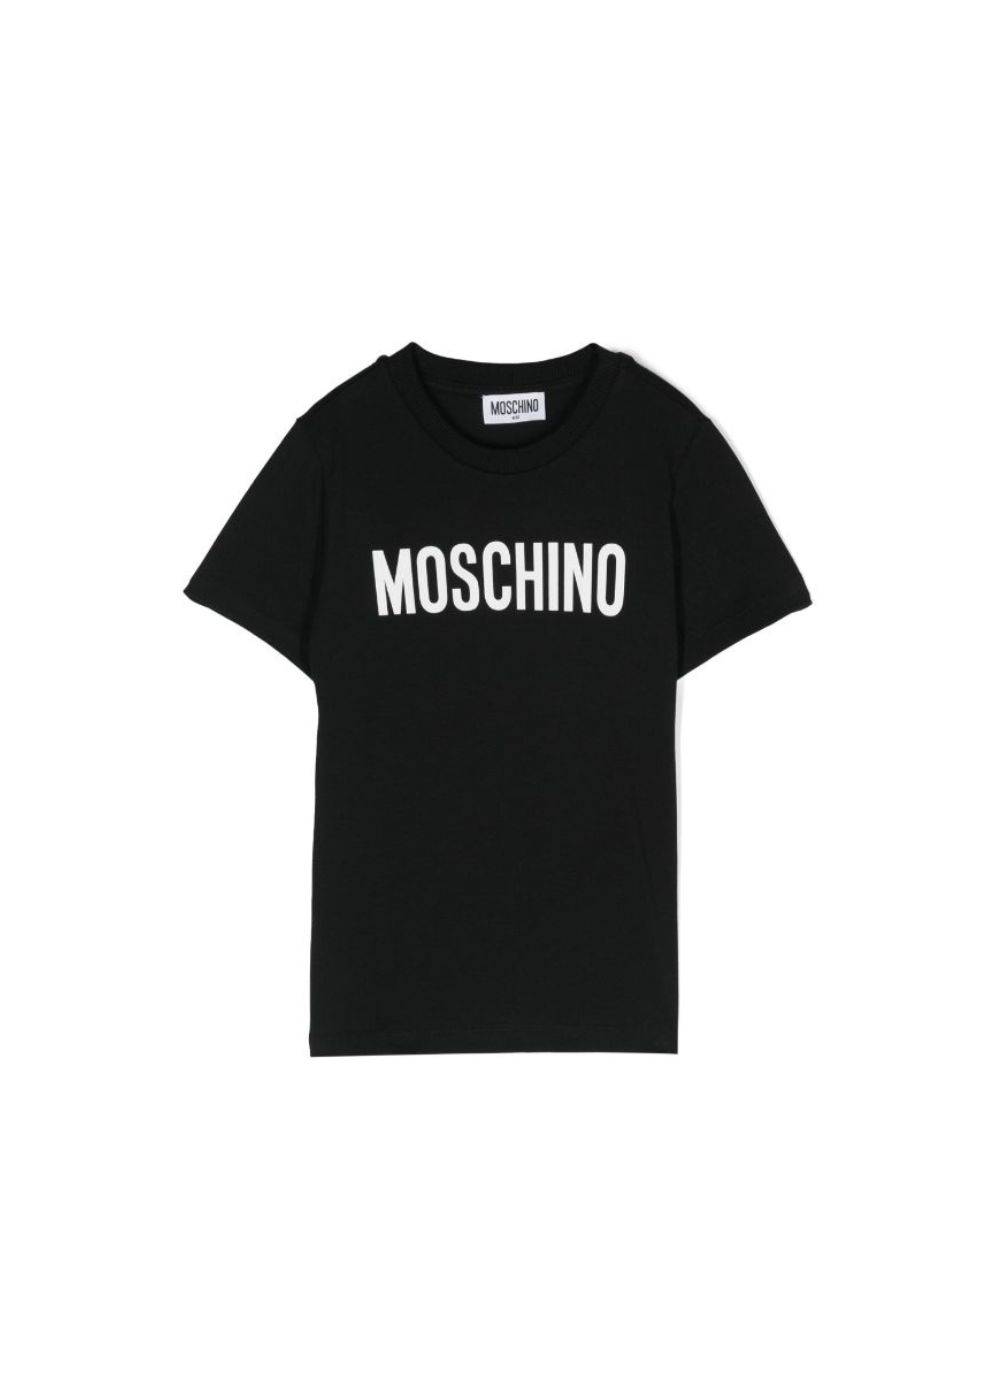 Featured image for “Moschino T-shirt con stampa”